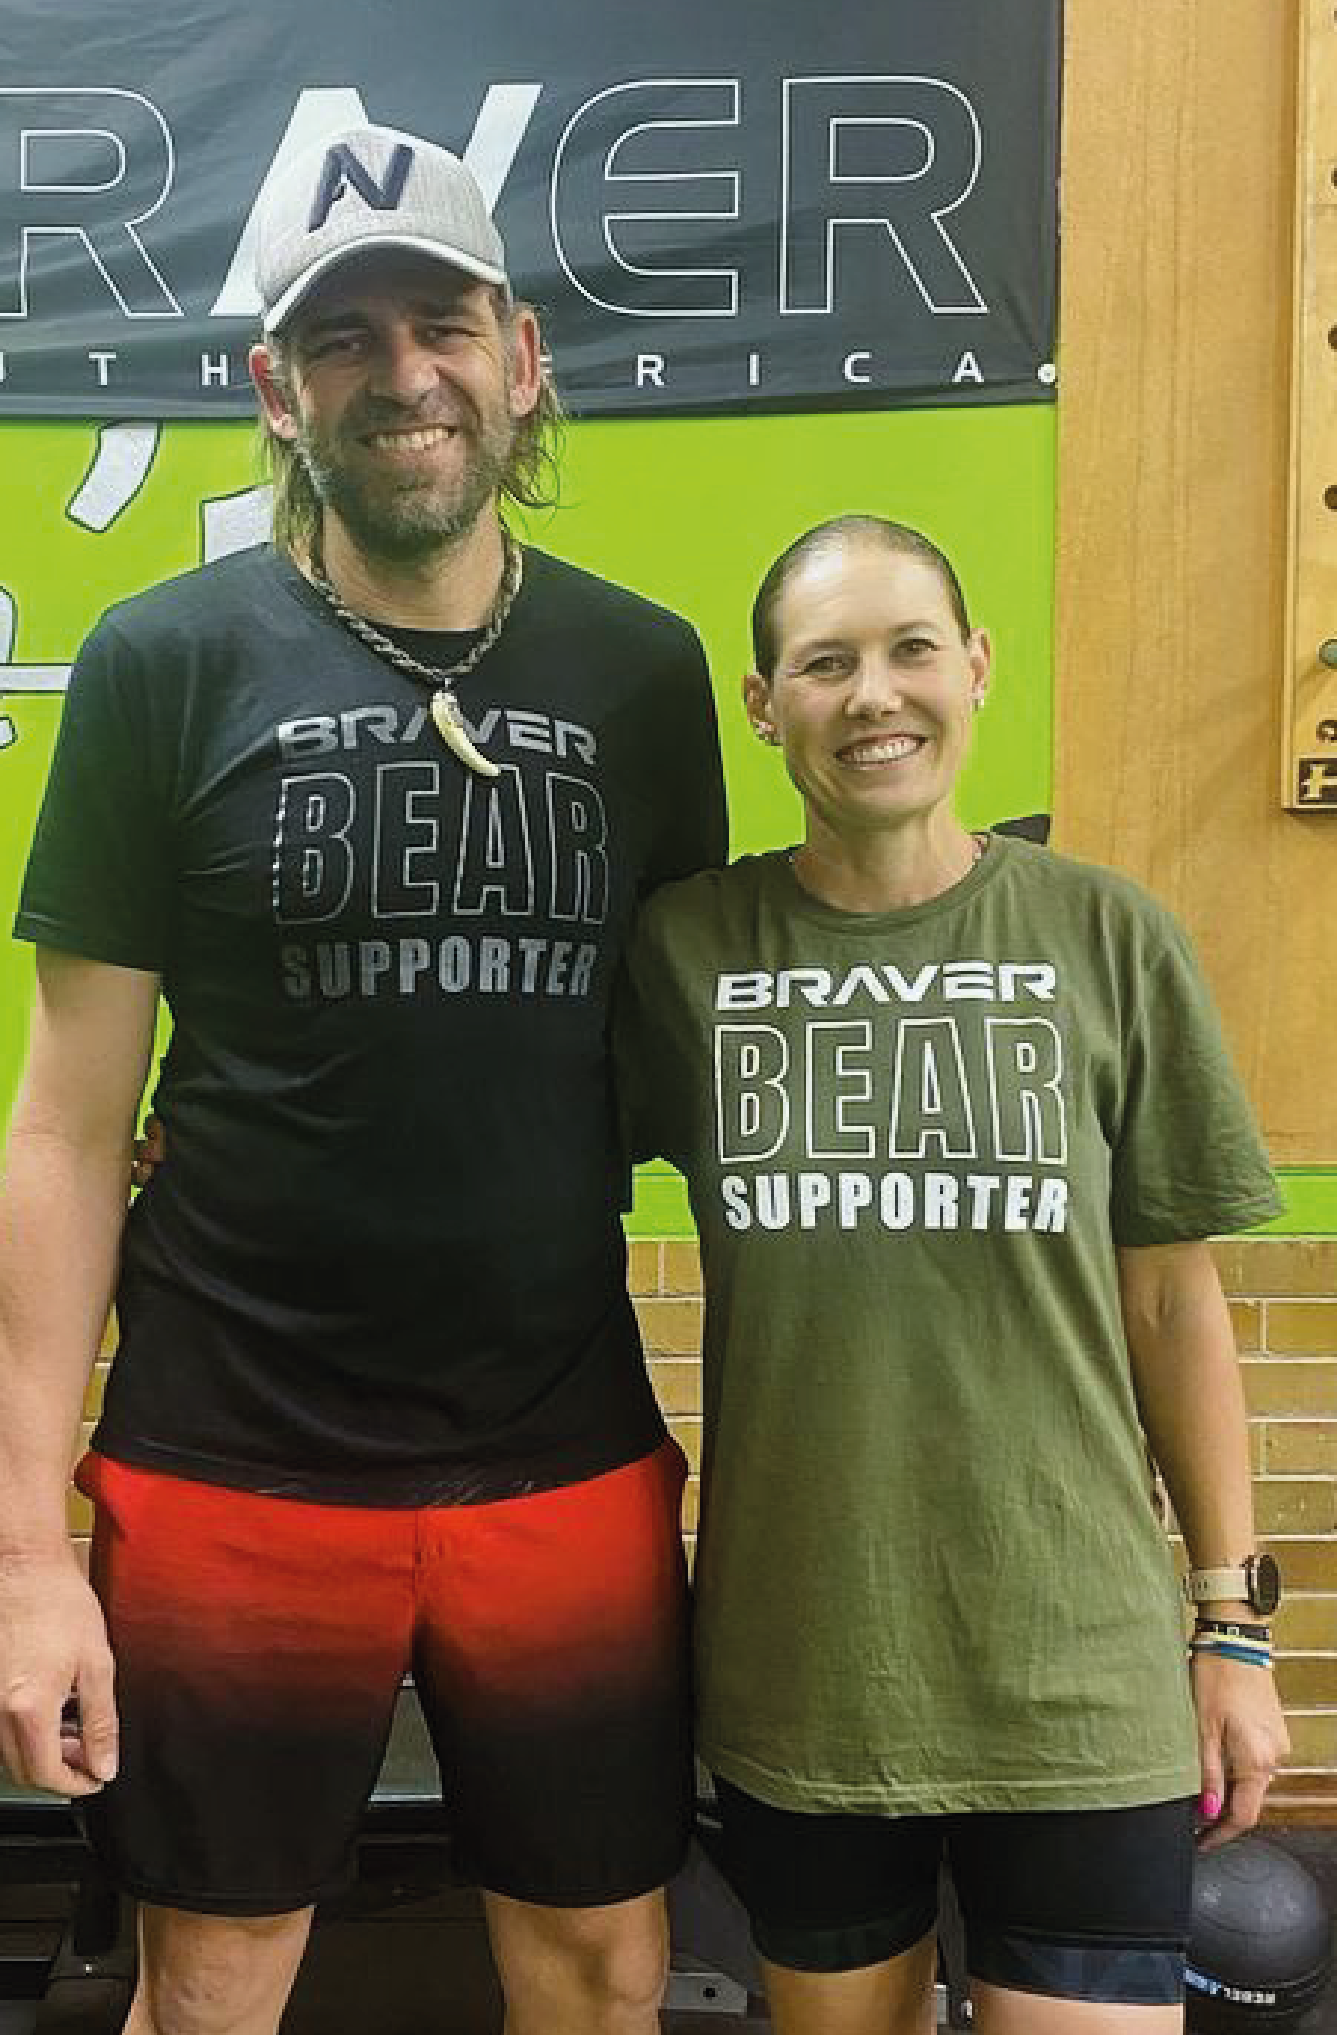 SUPPORT FOR ATHLETE: THE BEAR